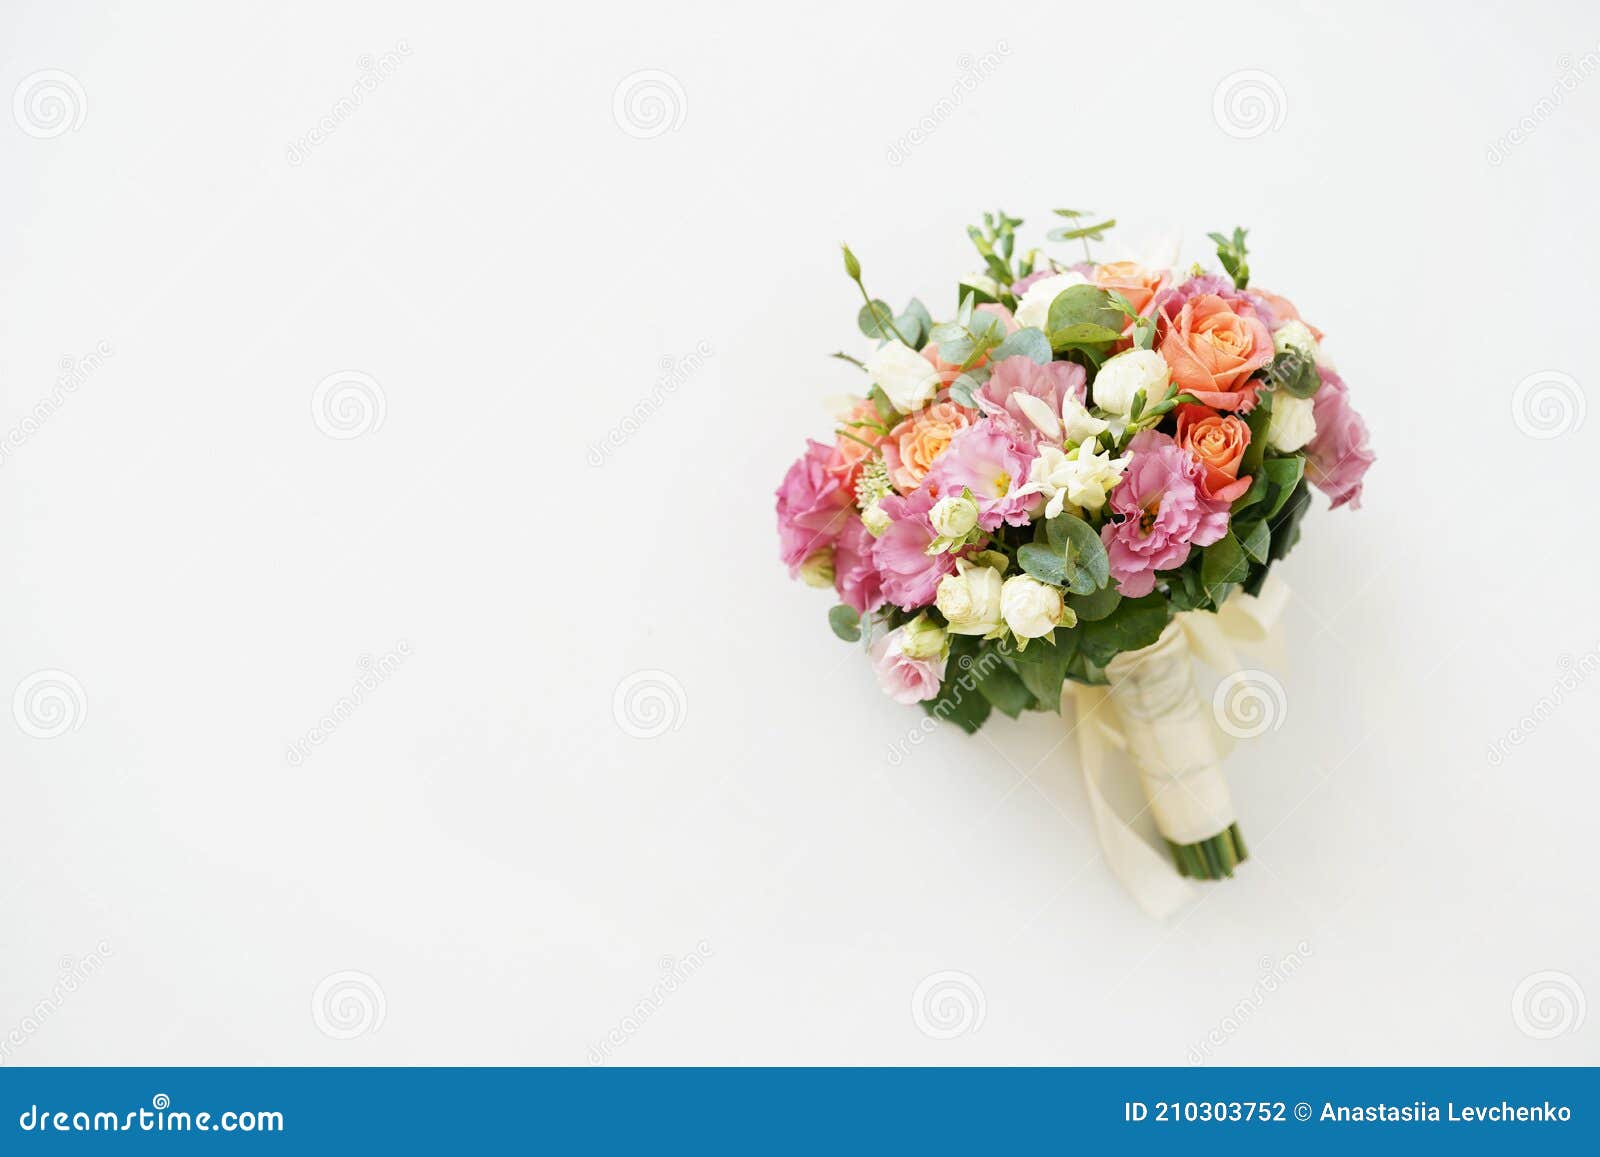 bouquet of flowers  on white background with copy space. wedding day